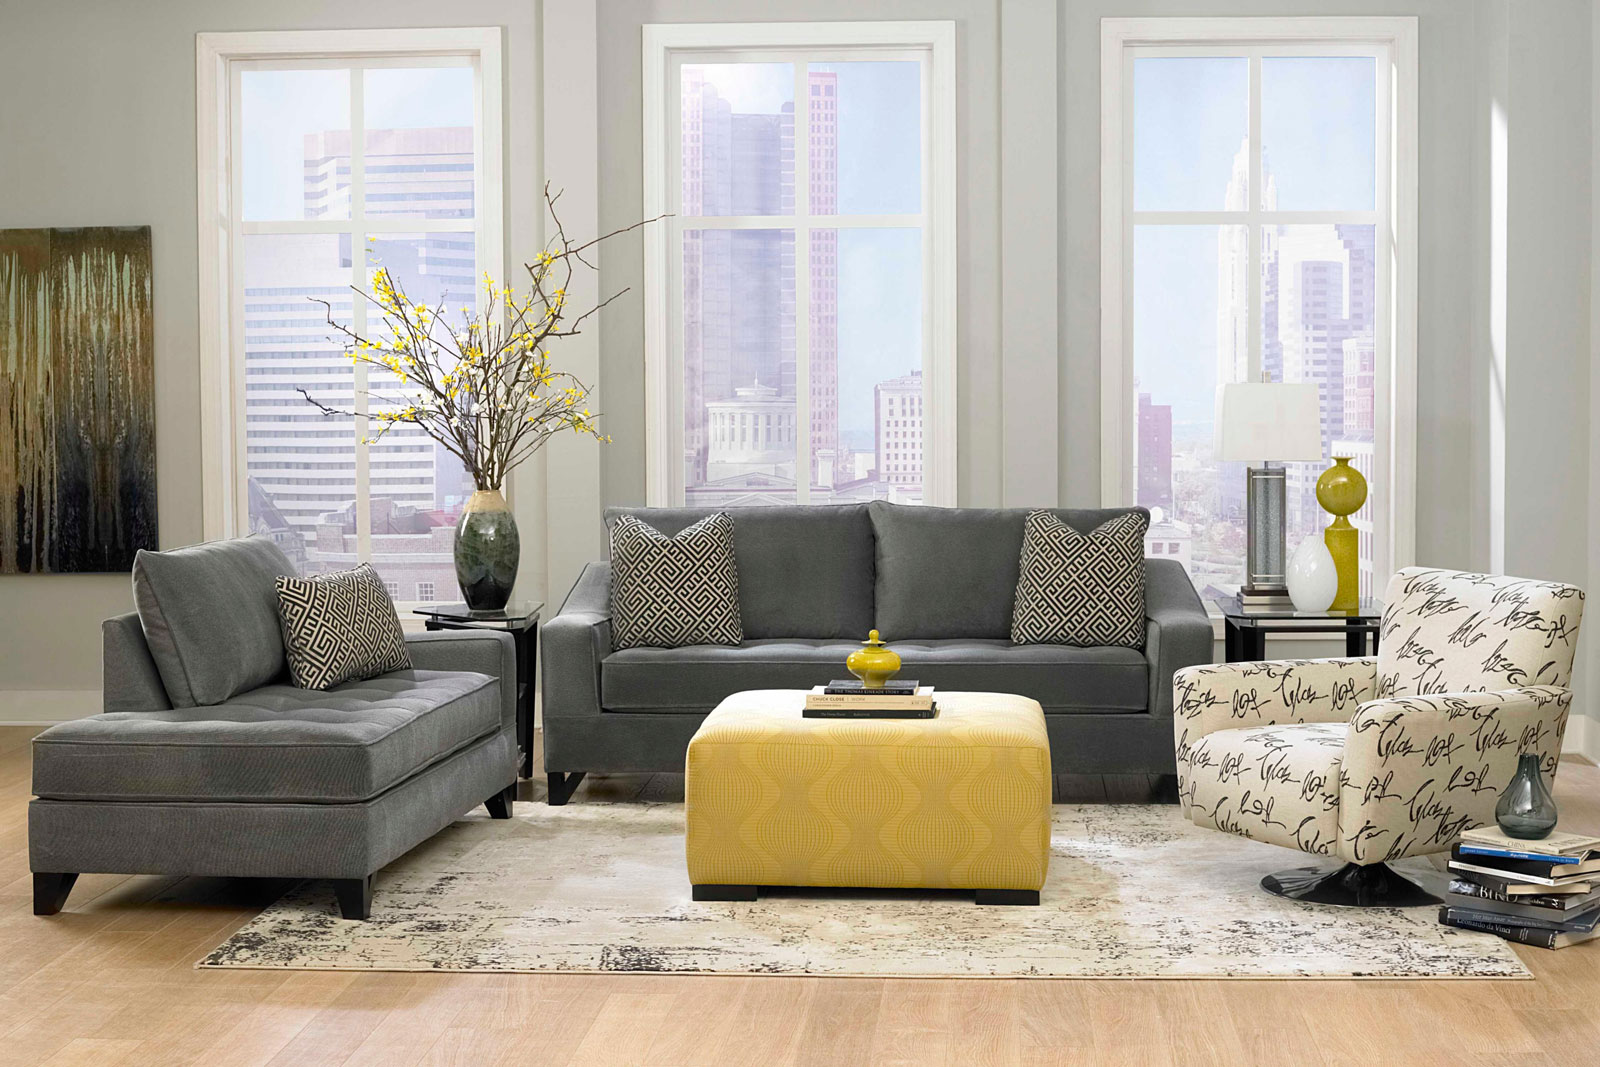 Grey Sofa Sleeper Dazzling Grey Sofa And Tufted Sleeper Sofa With White Pedestal Living Room Chair Furnished With Yellow Soft Table On Rug And Completed With Living Room Decorations Living Room Perfect Living Room Chair Design